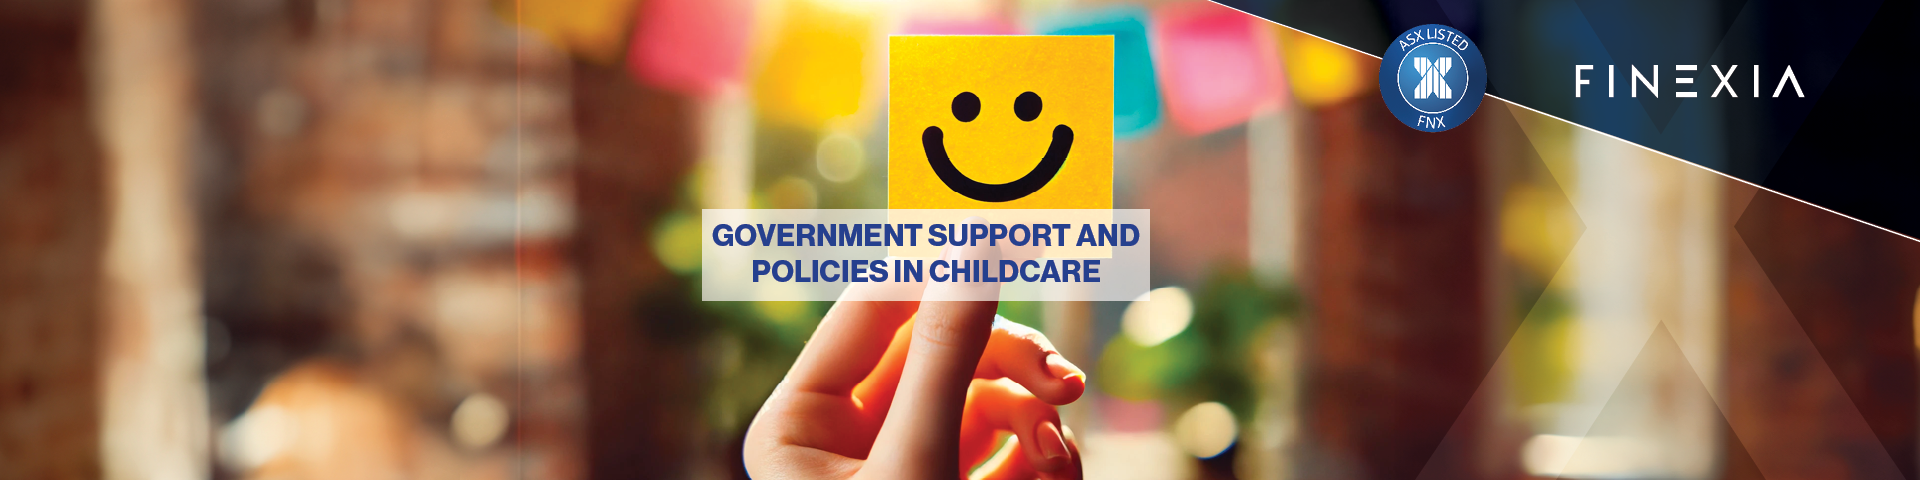 Government Support and Policies in Childcare